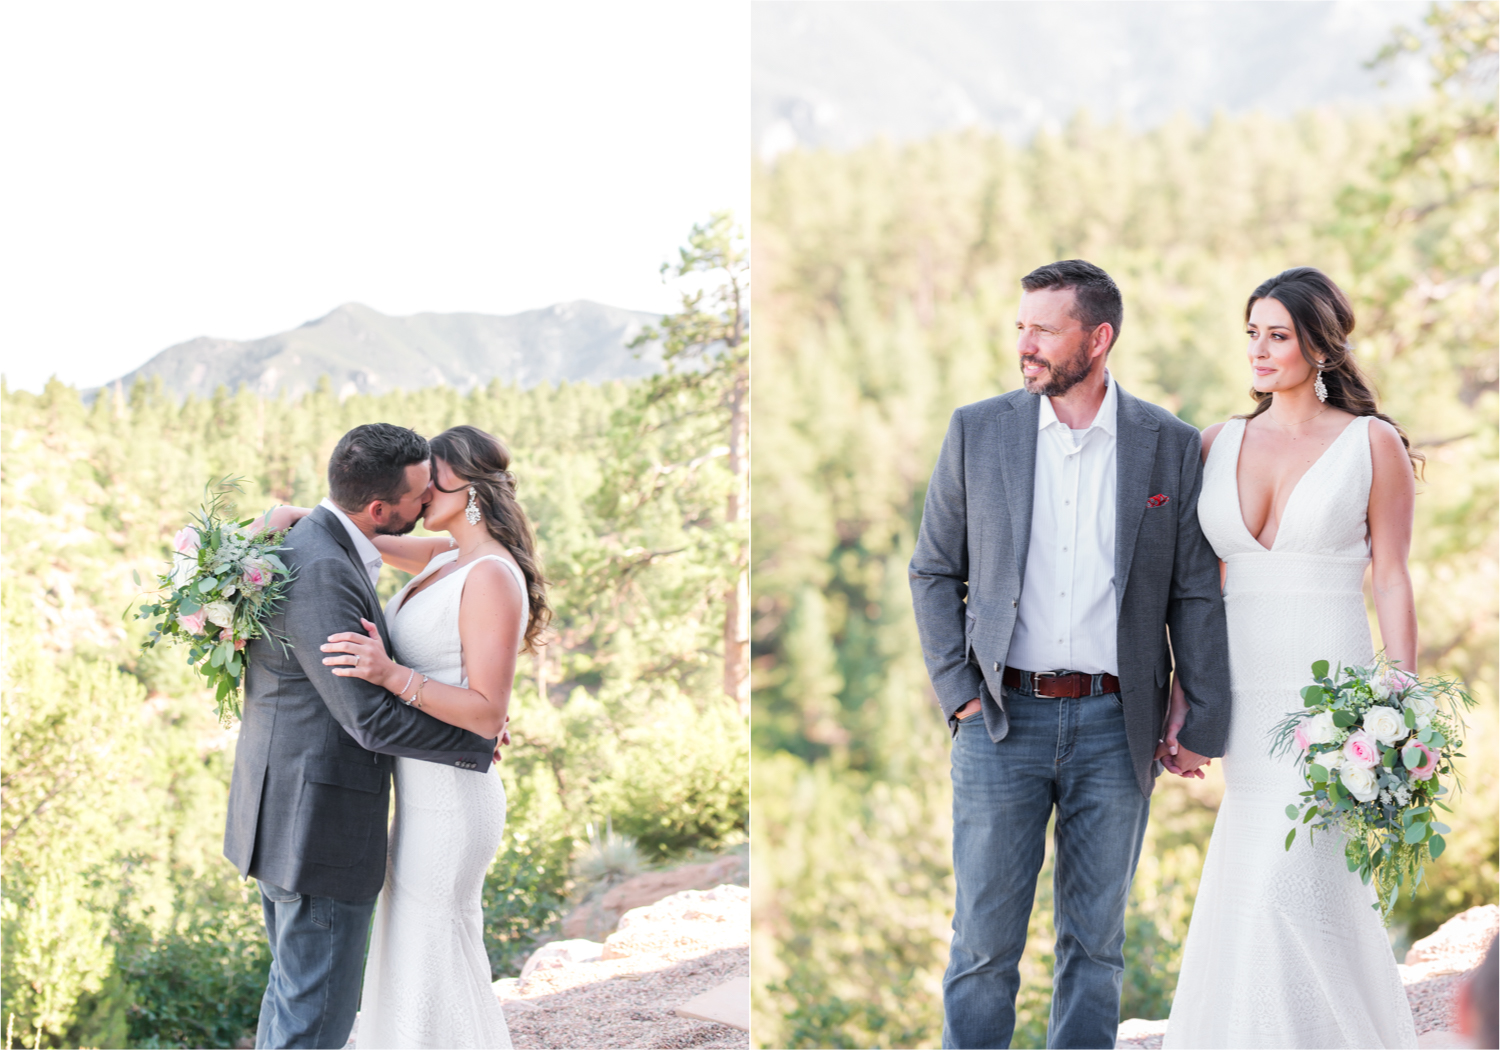 Autumn mountain wedding in Florence Colorado | Britni Girard Photography | Colorado Wedding Photo and Video Team | Mountainside Cabin for intimate wedding with rustic farm-tables and romantic details | Wedding Colors White, Dusty Rose and Sage | Florals by Skyway Creations  | Bride and Groom Portraits in the Mountains